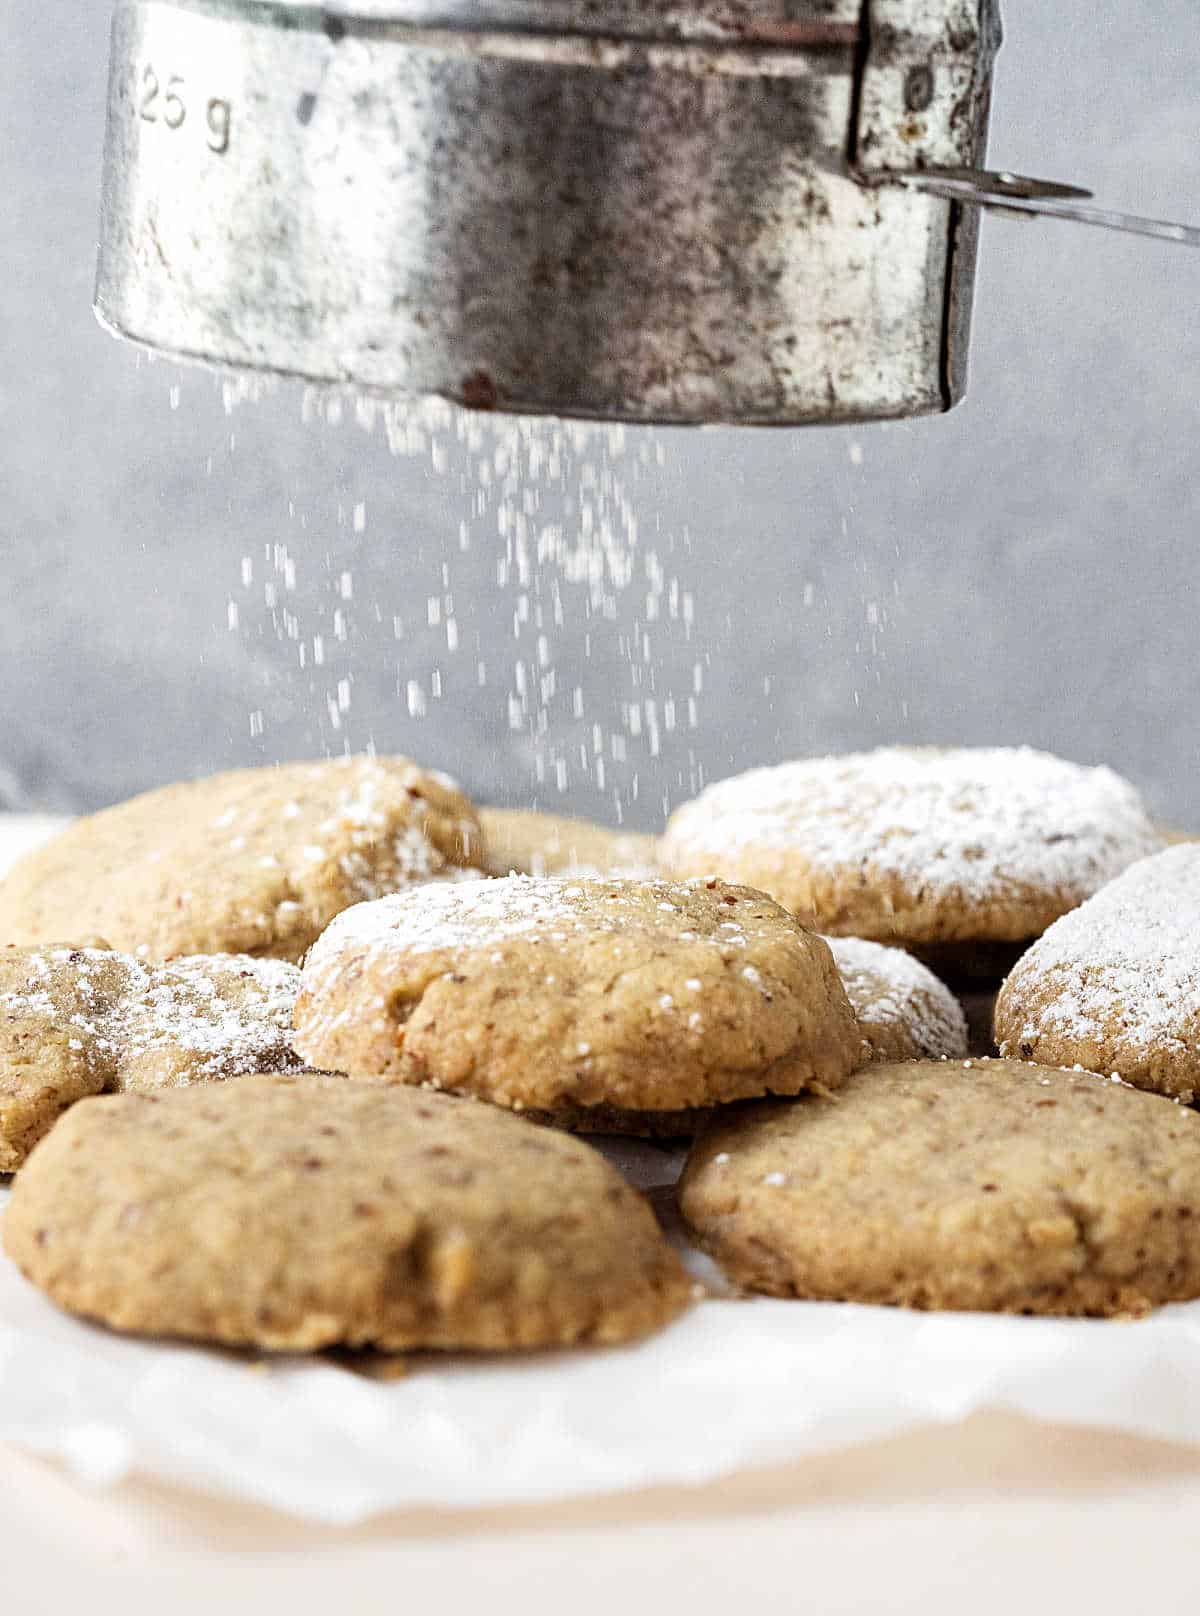 Powdered sugar being sifted over pecan cookies in a pile on a cream colored surface.